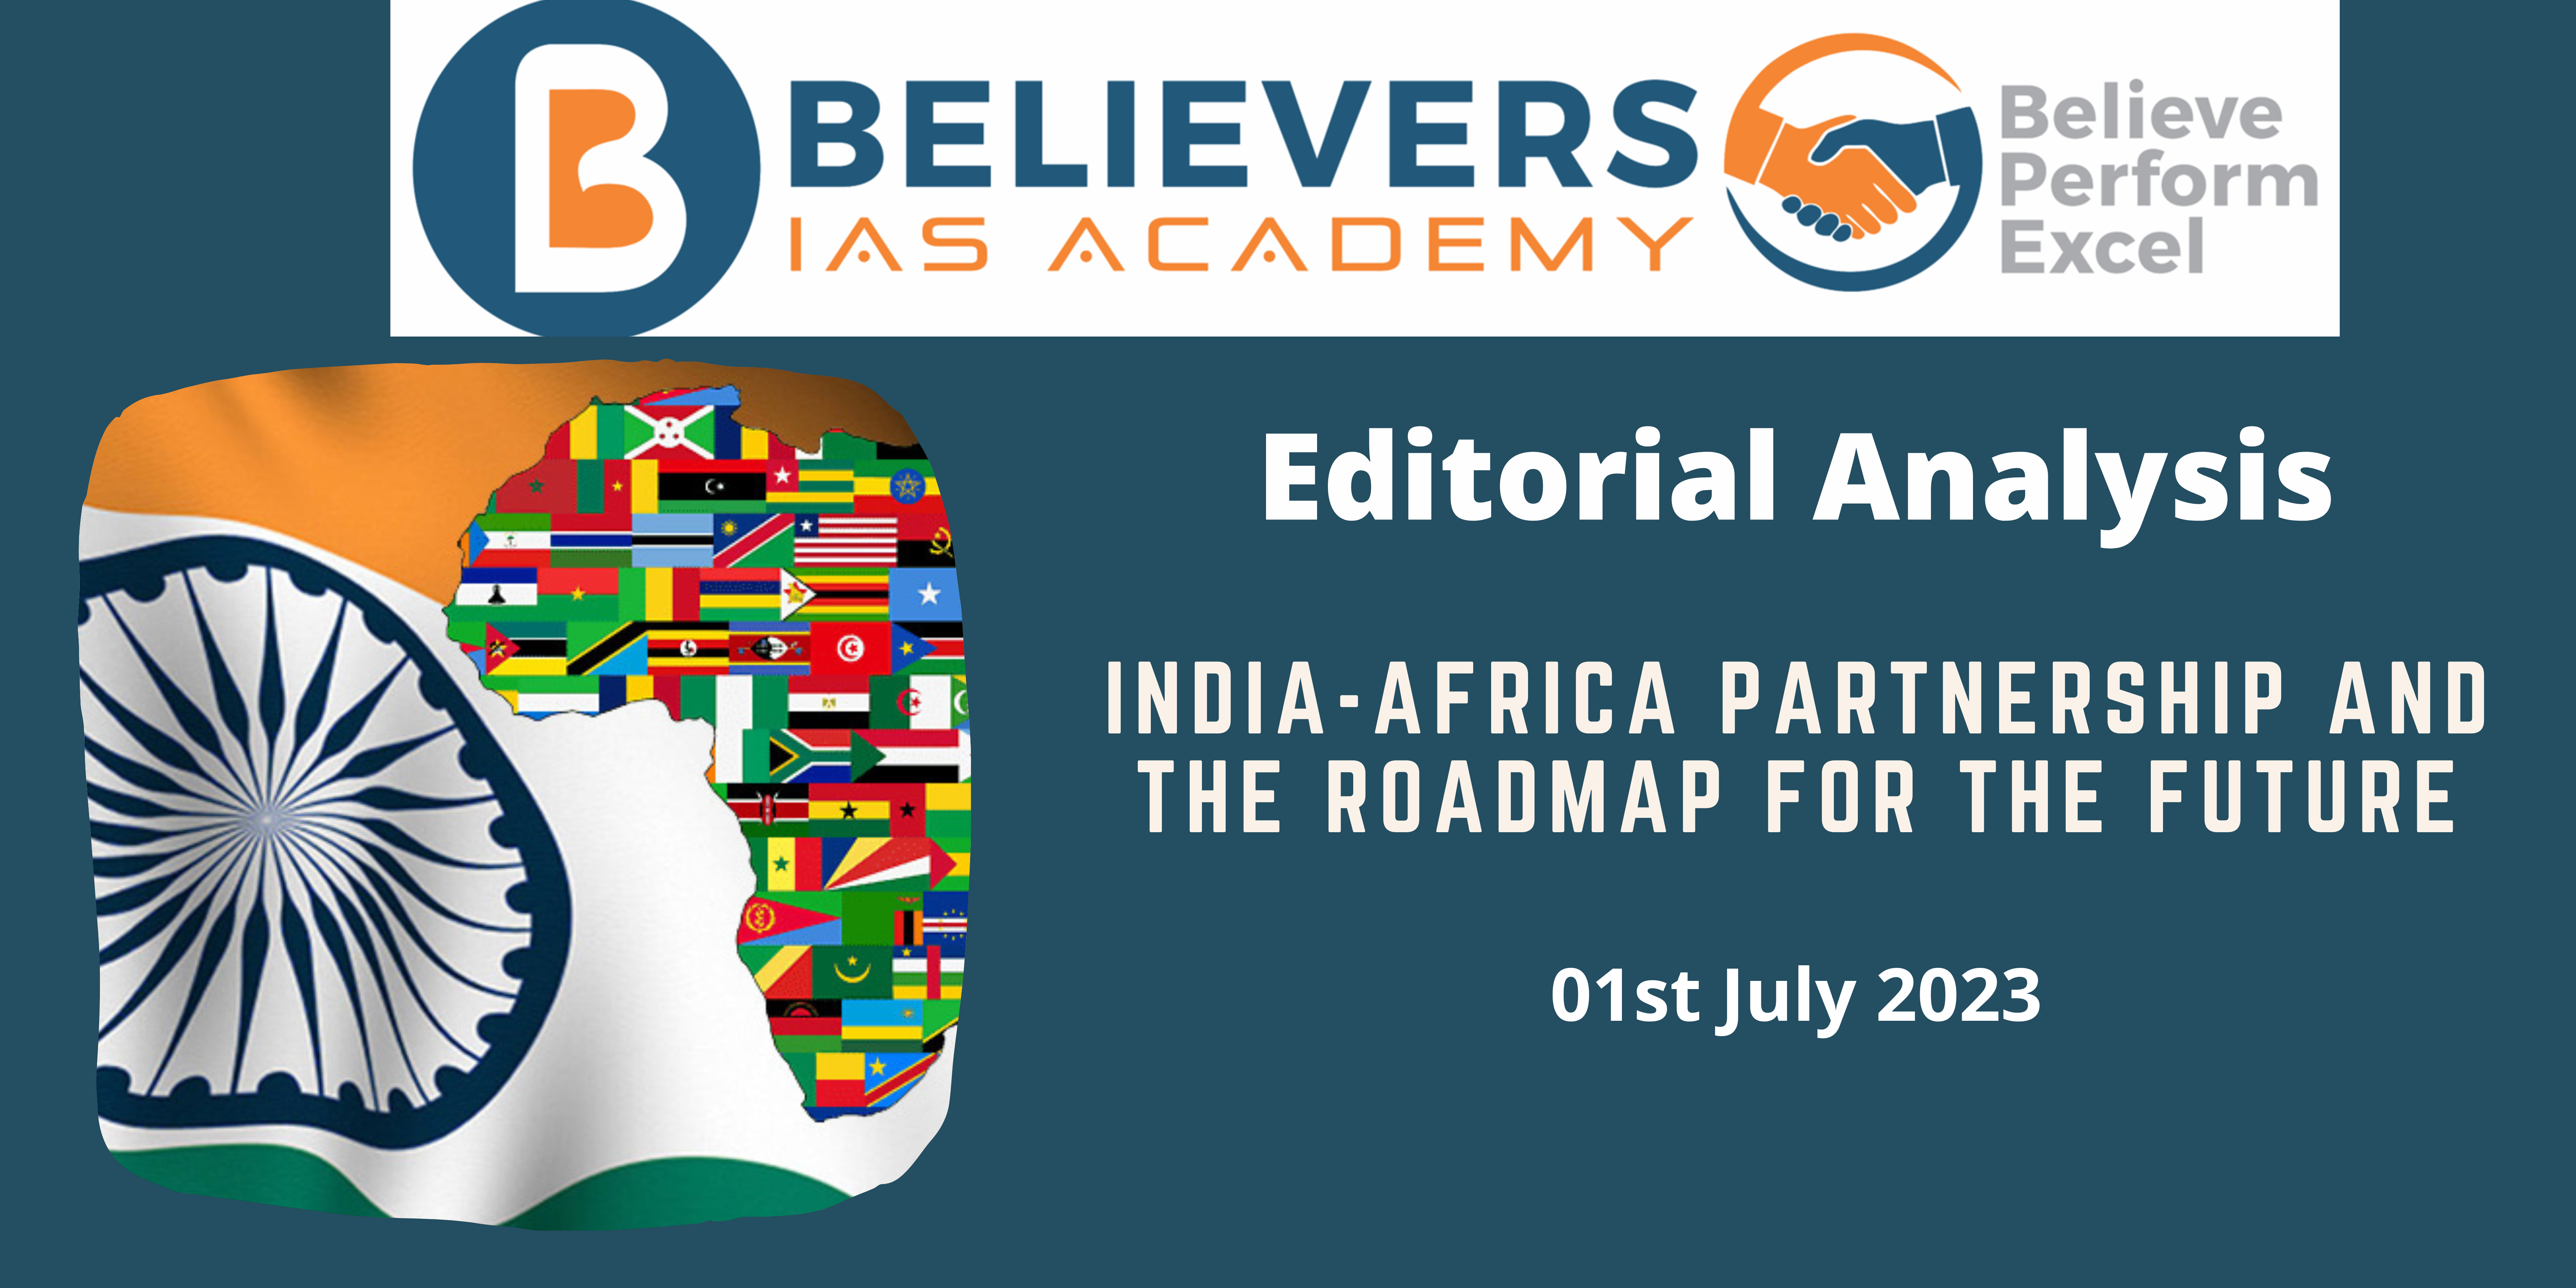 India-Africa Partnership and the Roadmap for the Future